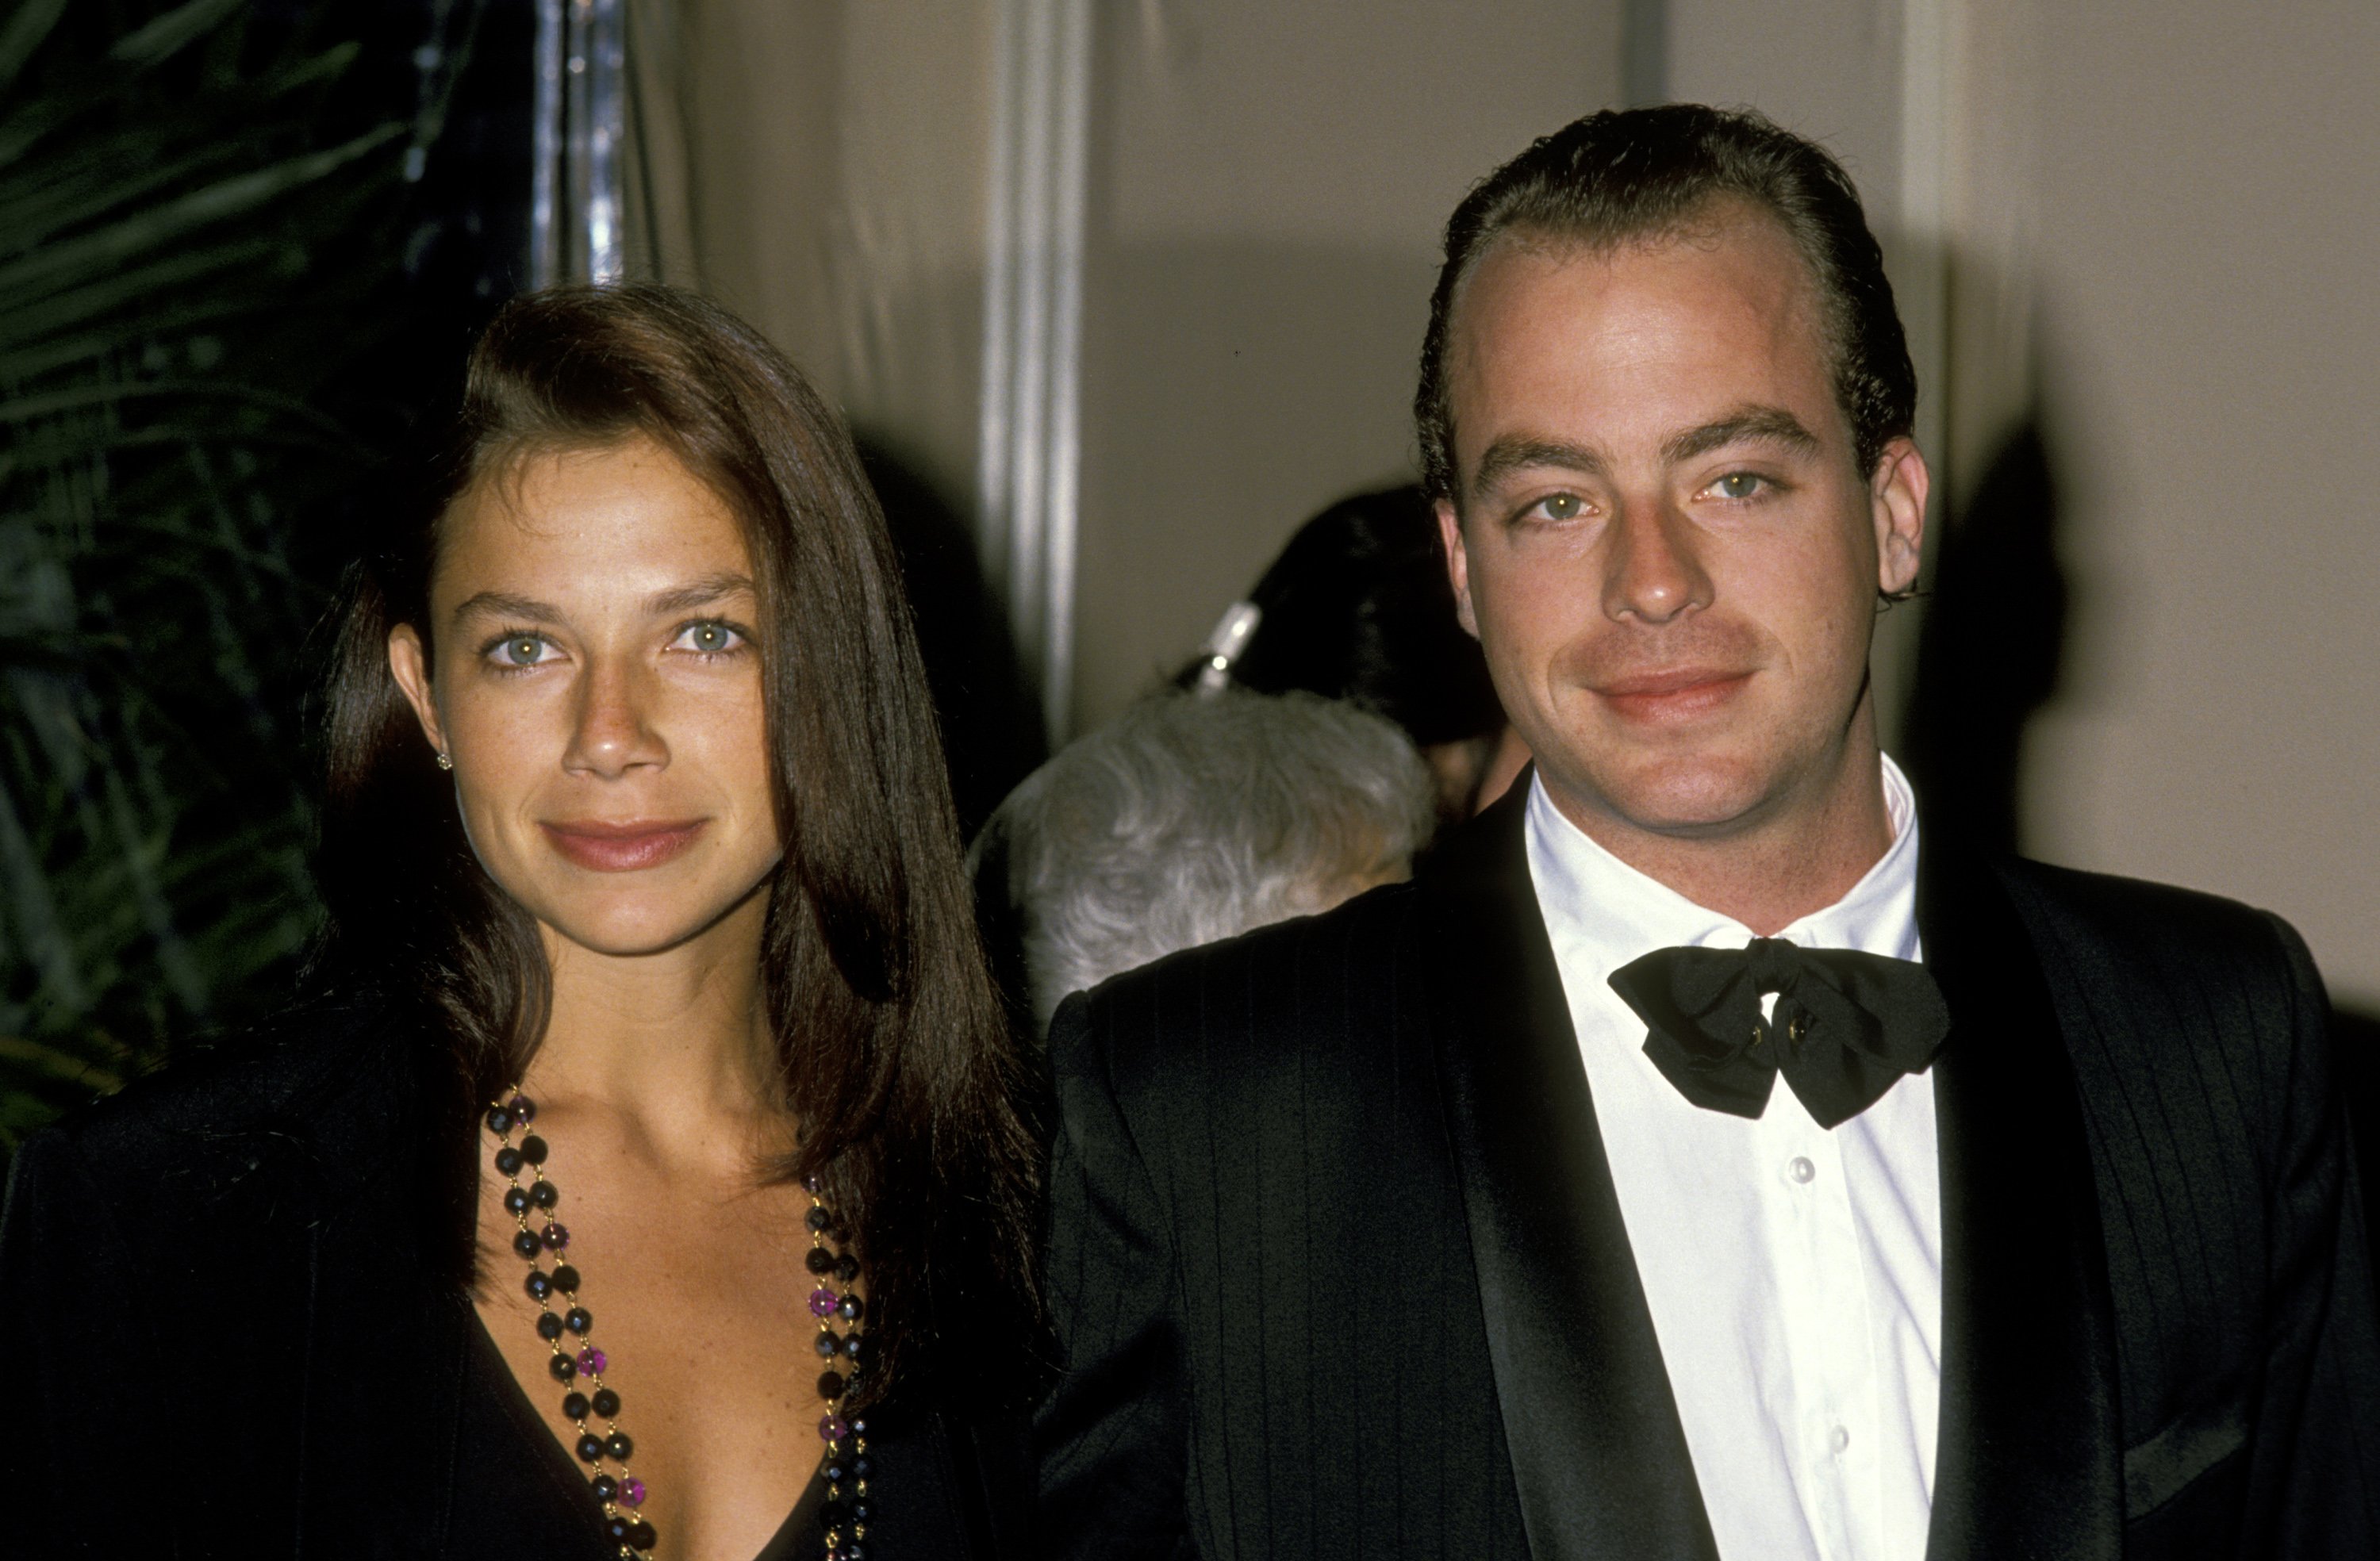 Justine Bateman and Leif Garrett at American Film Institute Honors Gregory Peck event hosted at Beverly Hilton Hotel in Beverly Hills, CA, on March 09, 1989. | Source: Getty Images